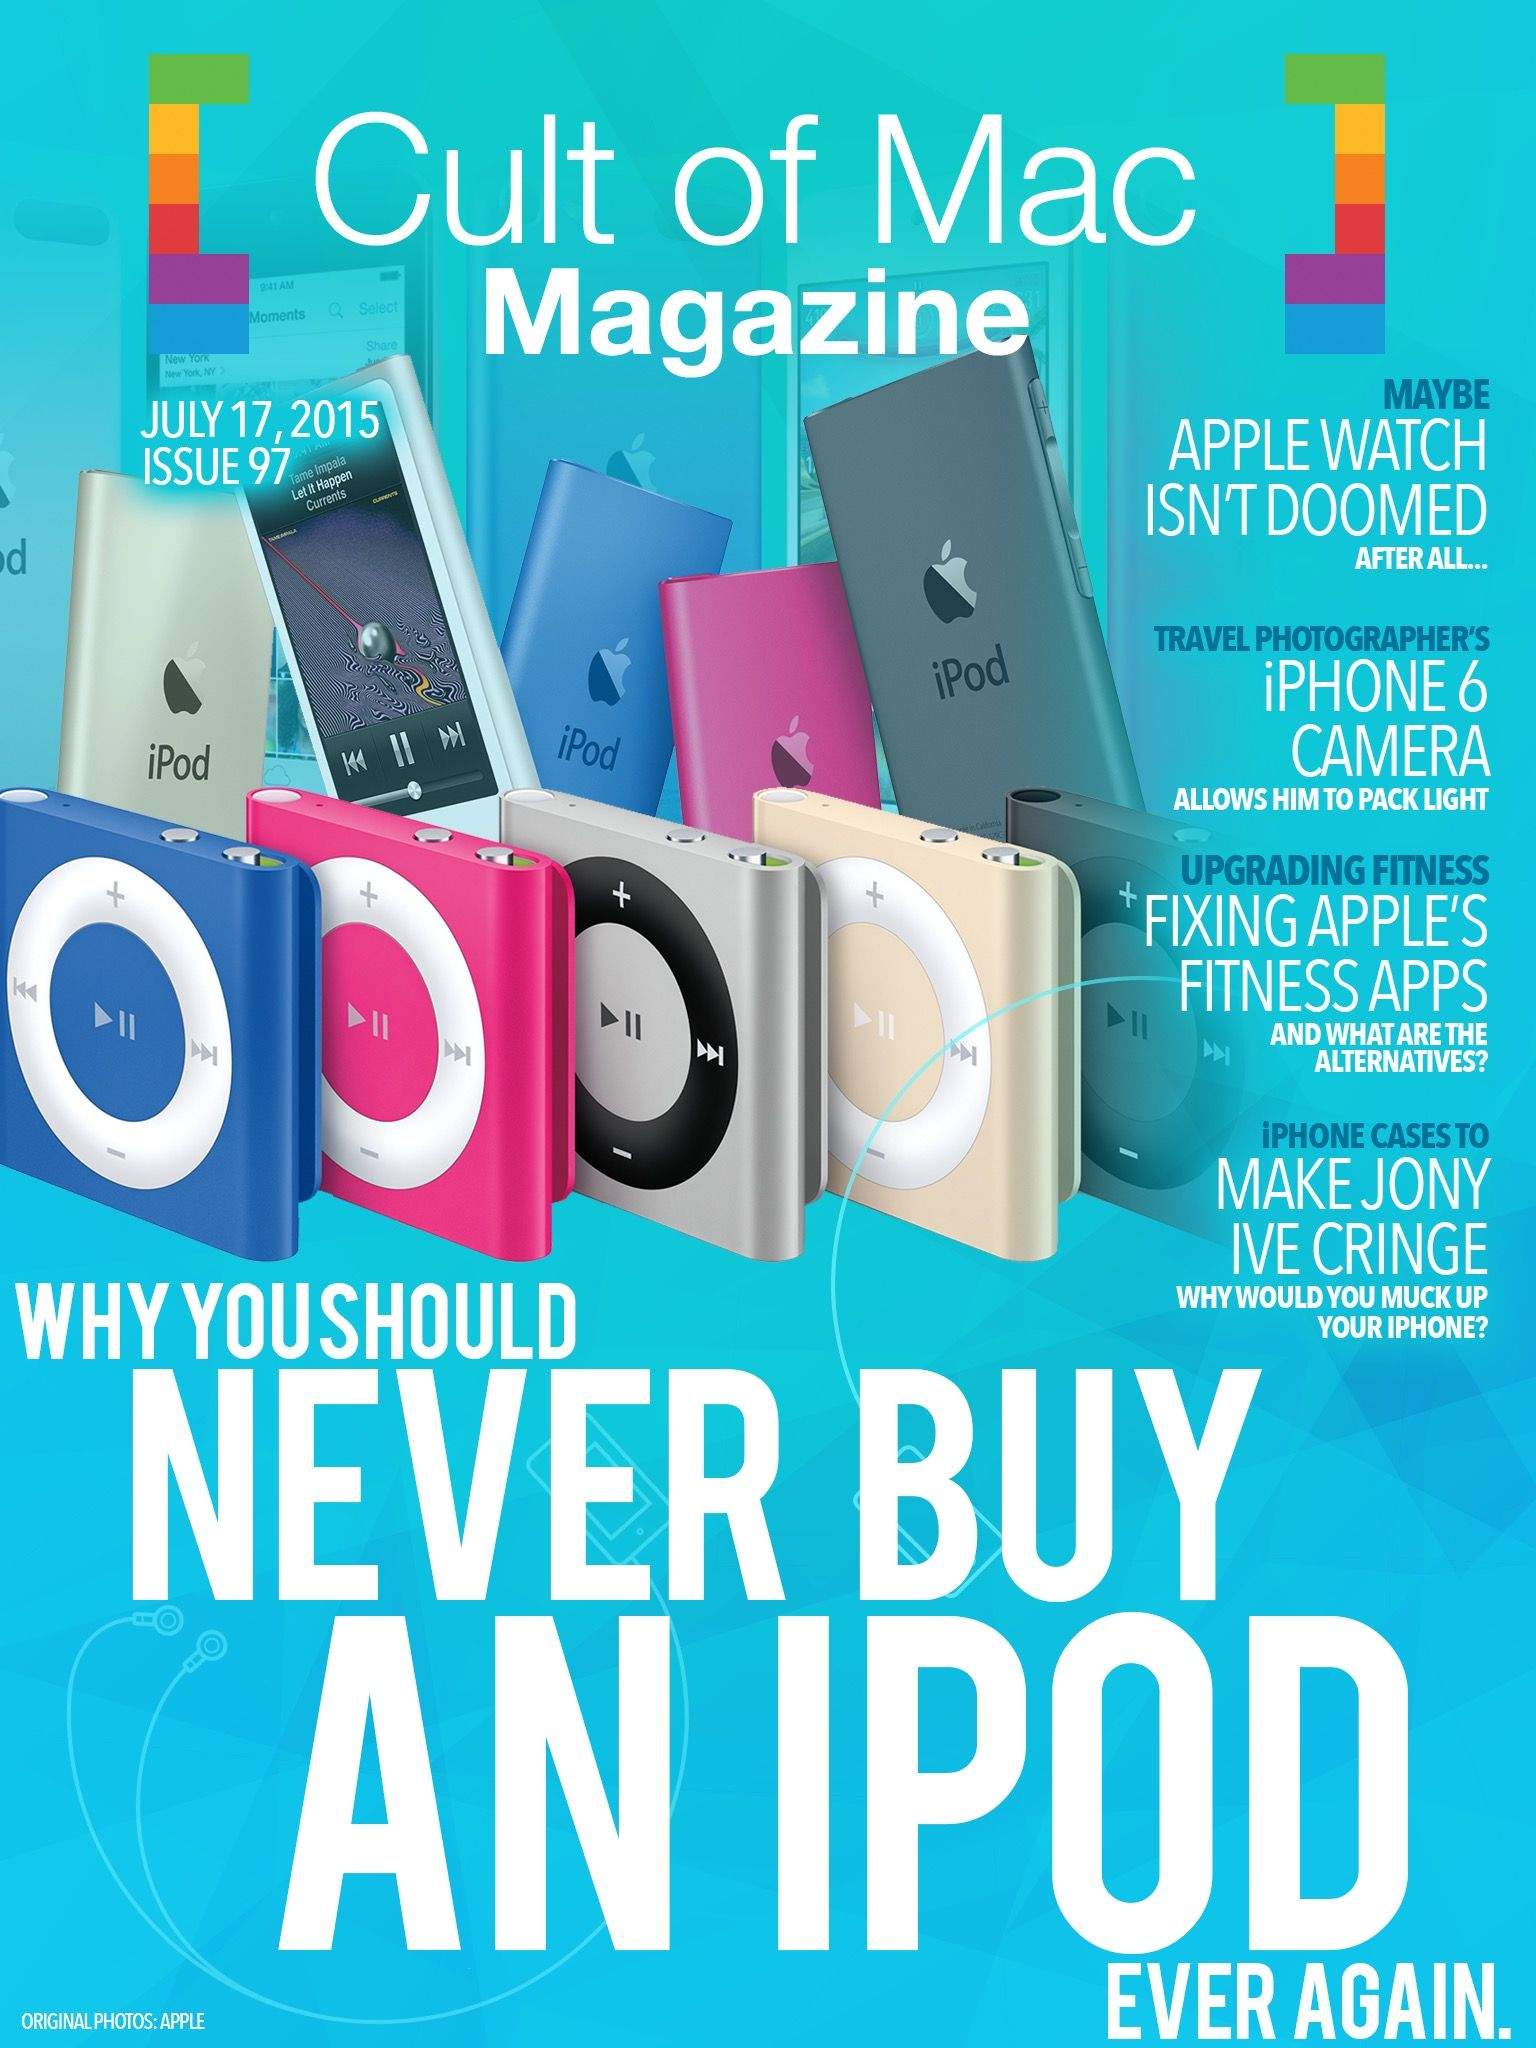 New iPods are out, but should you get one?